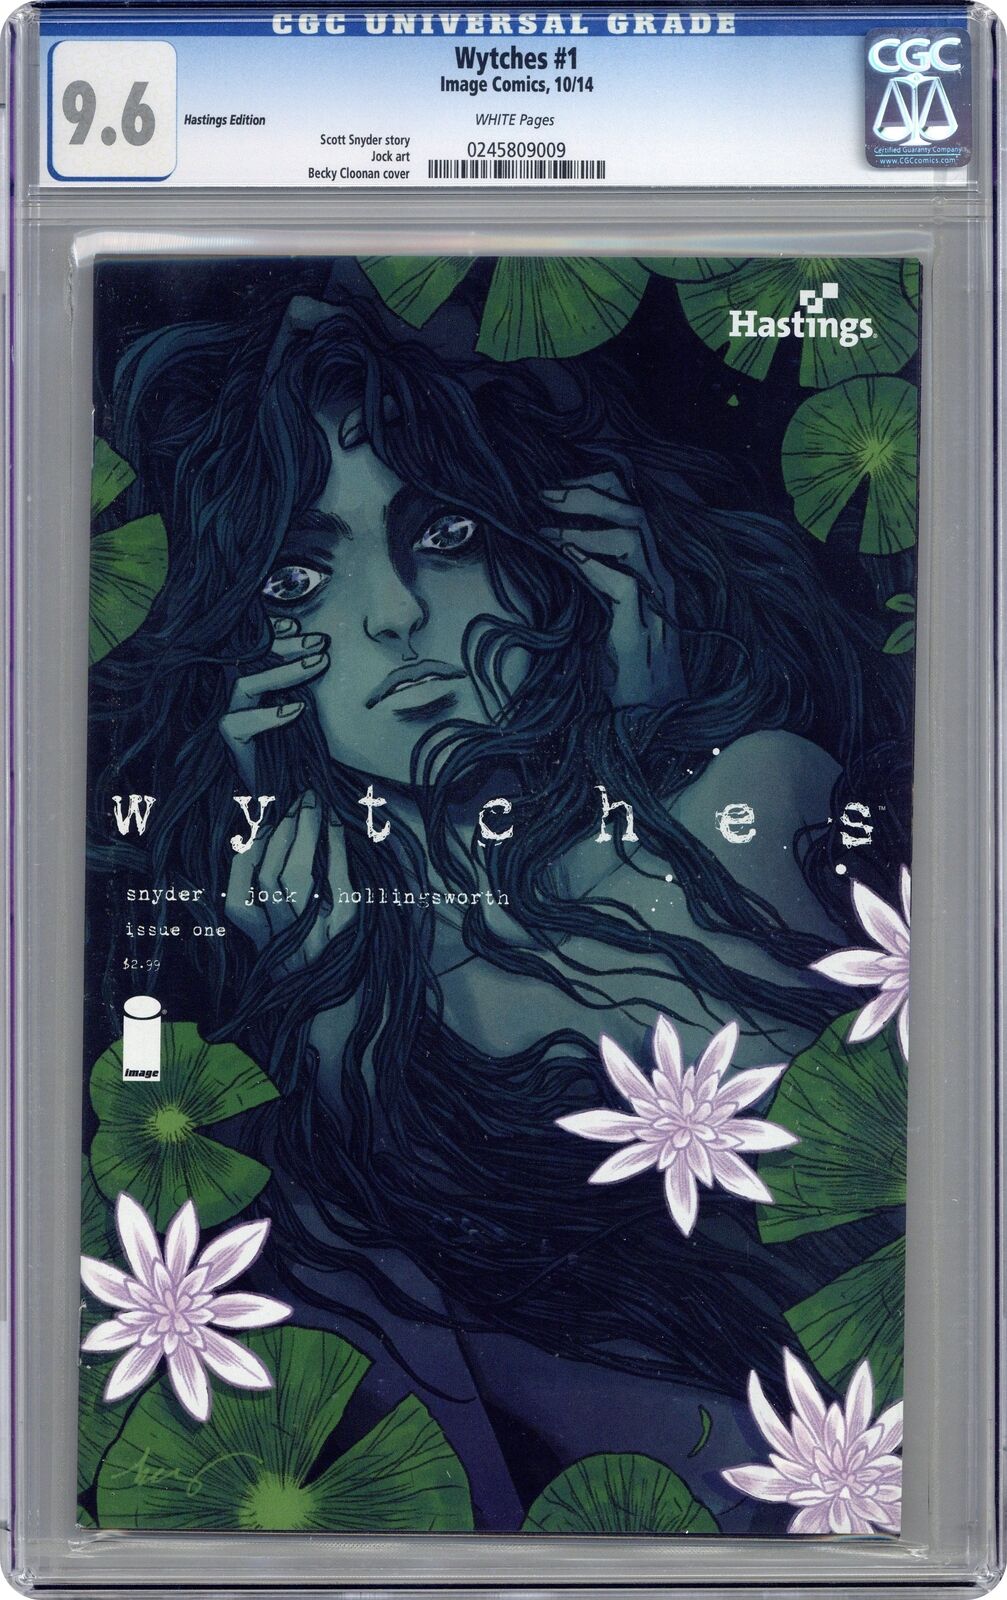 Wytches #1 Cloonan Hastings Variant CGC 9.6 2014 0245809009